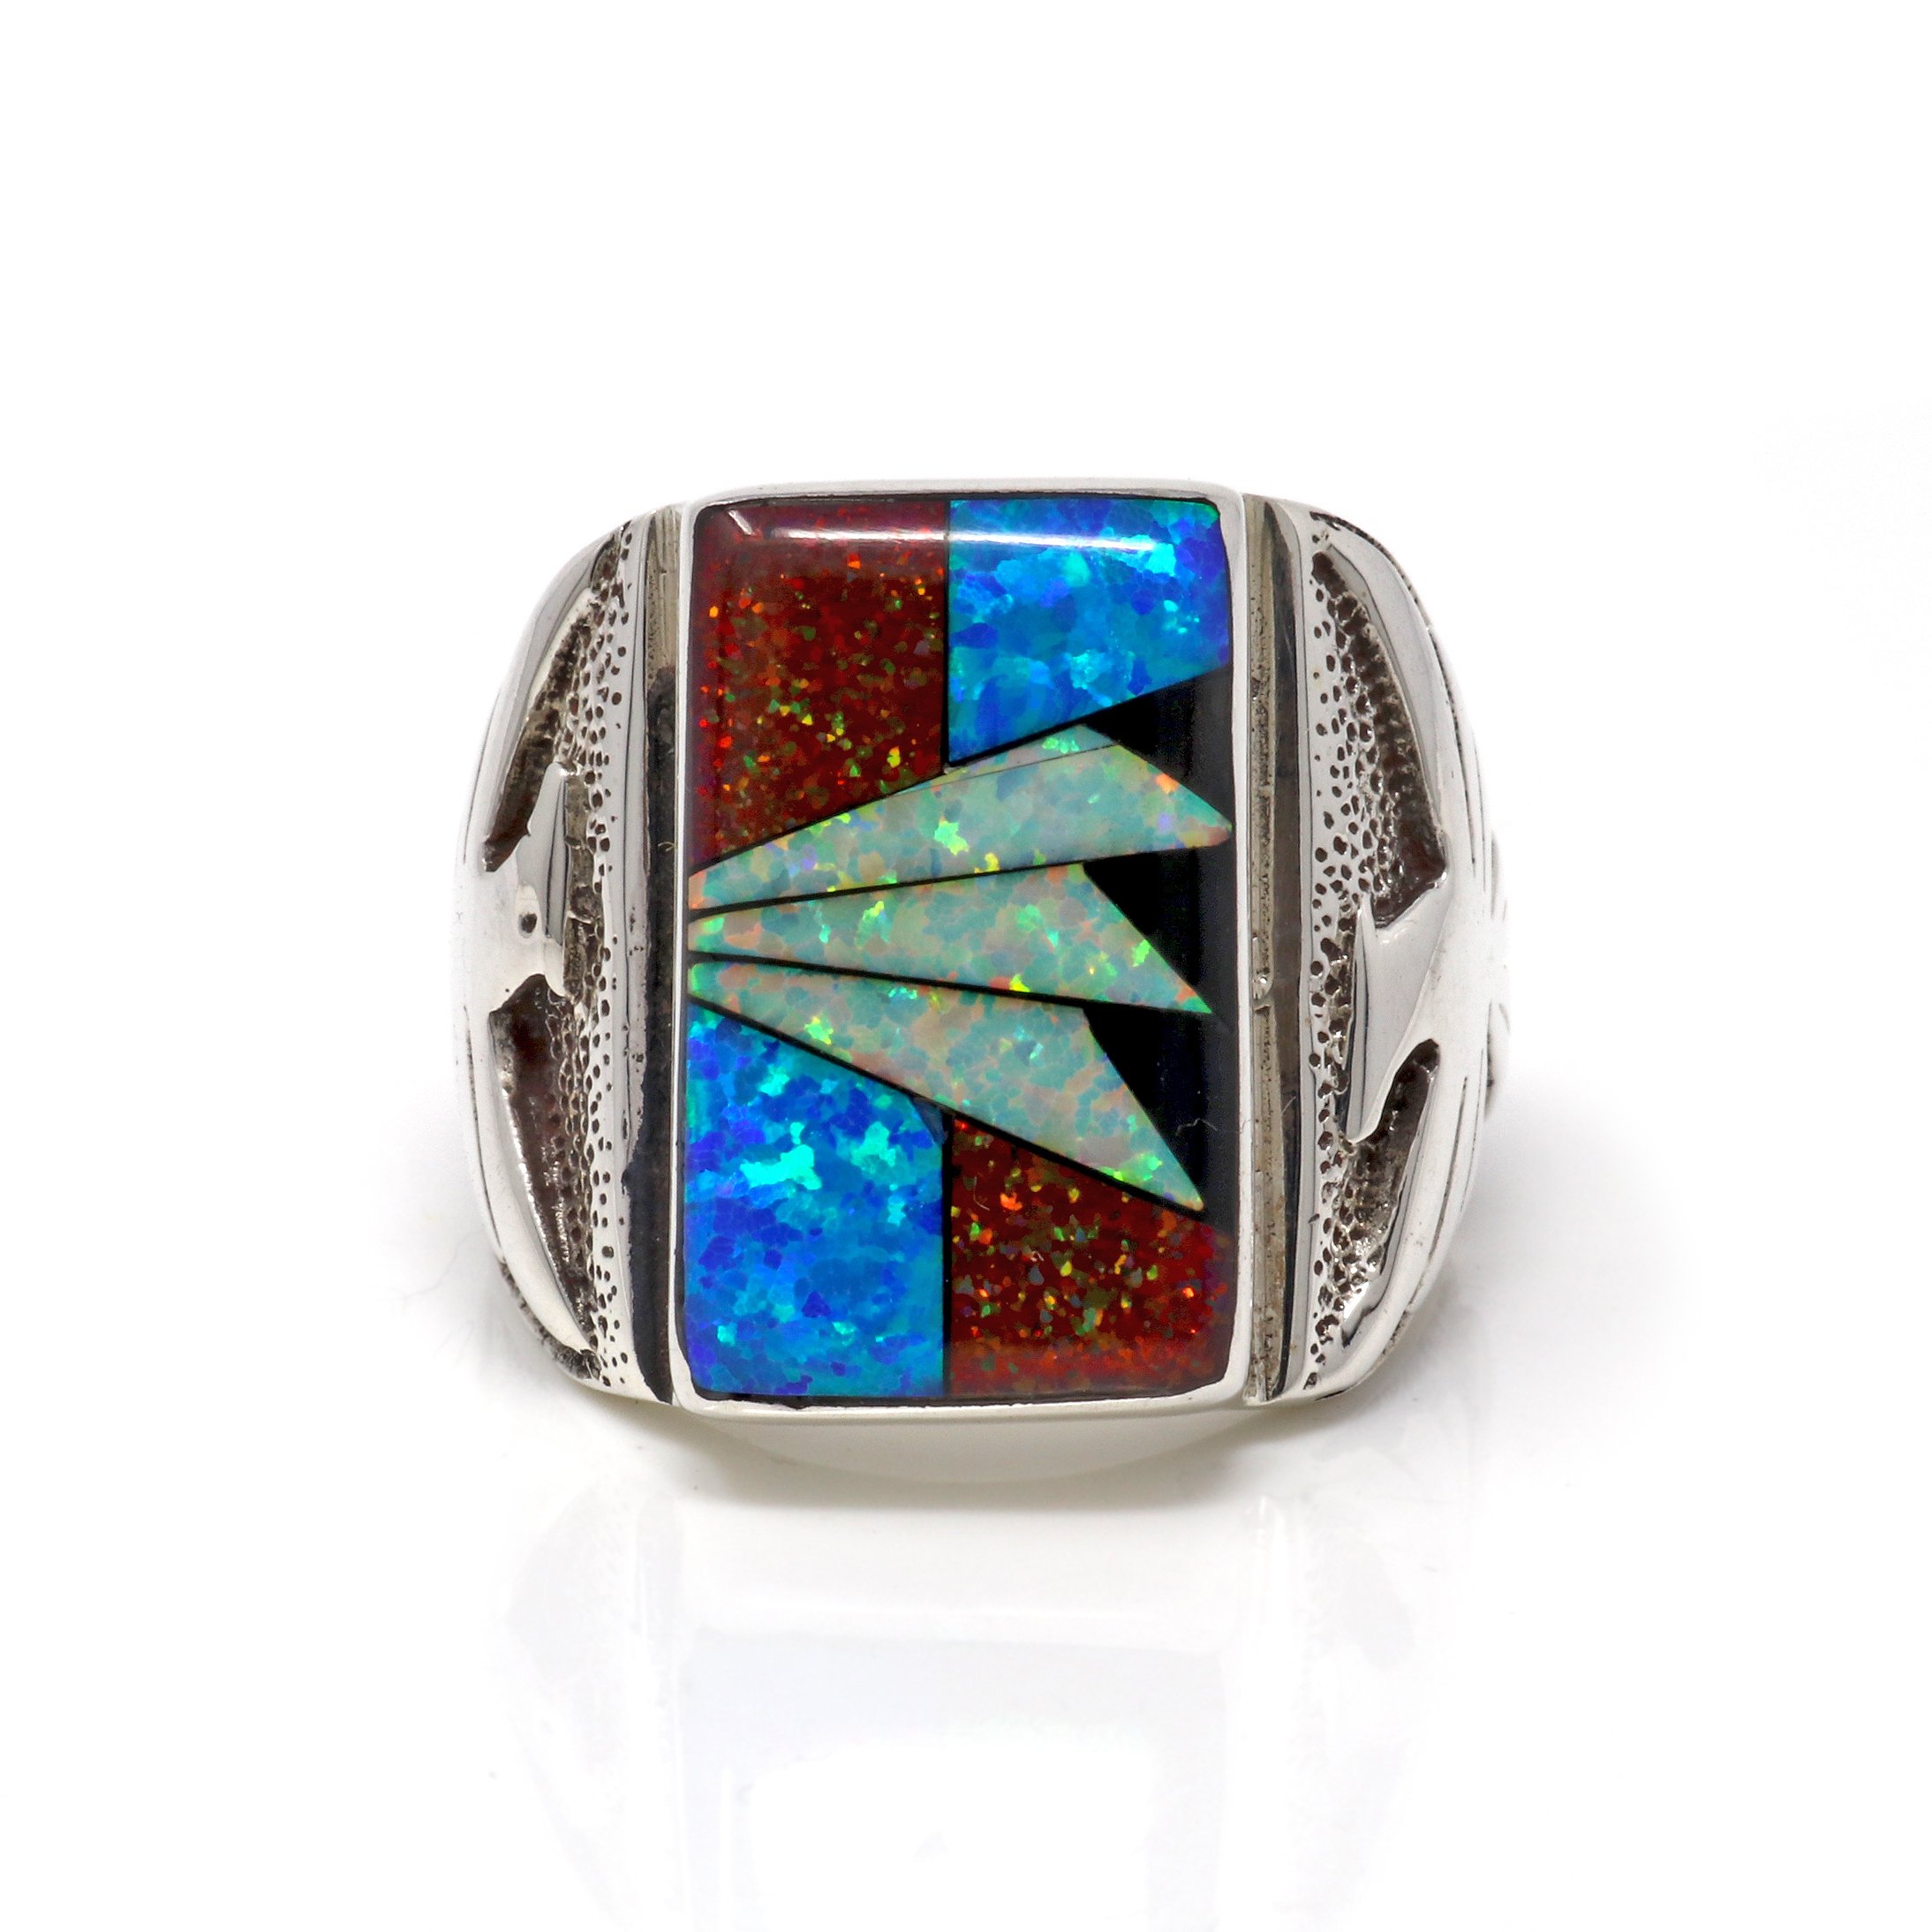 Inlay Ring Size 9 - Multicolor Micro Inlaid Rectangle Cabochon Set In Silver Bezel With Rope Detail & Silver Eagle Detail - Multi Colored Fire Opal & Black Spinel